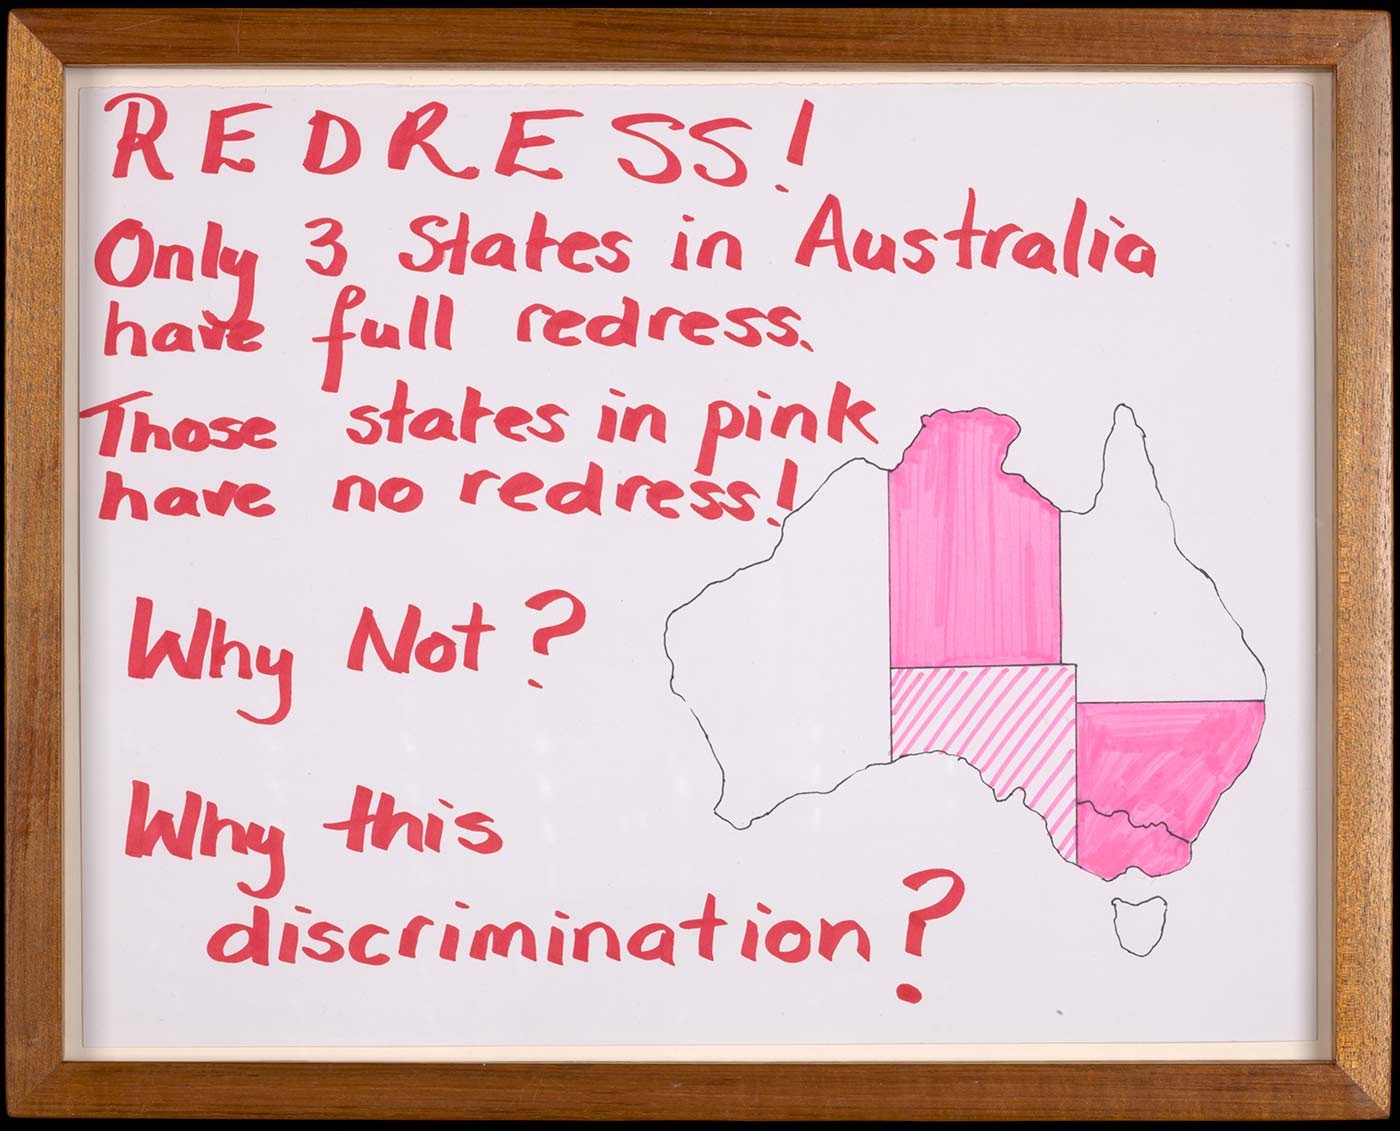 A hand-drawn map of Australia with the Northern Territory, New South Wales and Victoria coloured pink, and South Australia marked with diagonal pink lines. Written in red felt pen is 'REDRESS! / Only 3 States in Australia / have full redress. / Those states in pink / have no redress!/ Why Not? / Why this discrimination?'. - click to view larger image